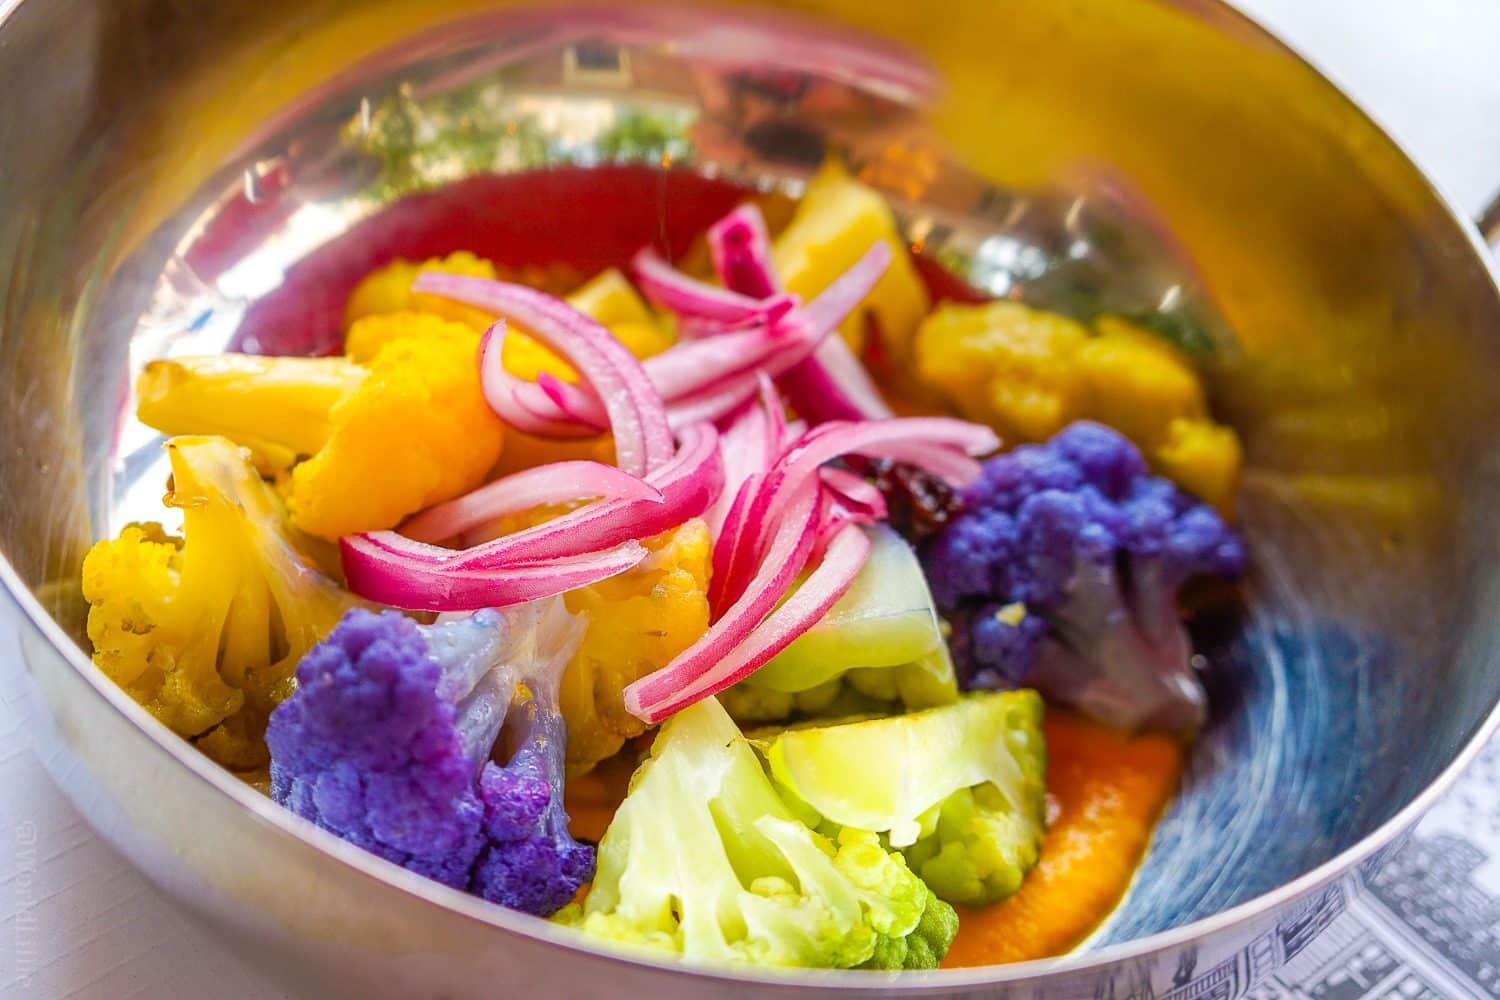 Multicolored cauliflower and onion appetizer in a silver bowl at the Red Lion Inn, Stockbridge, MA